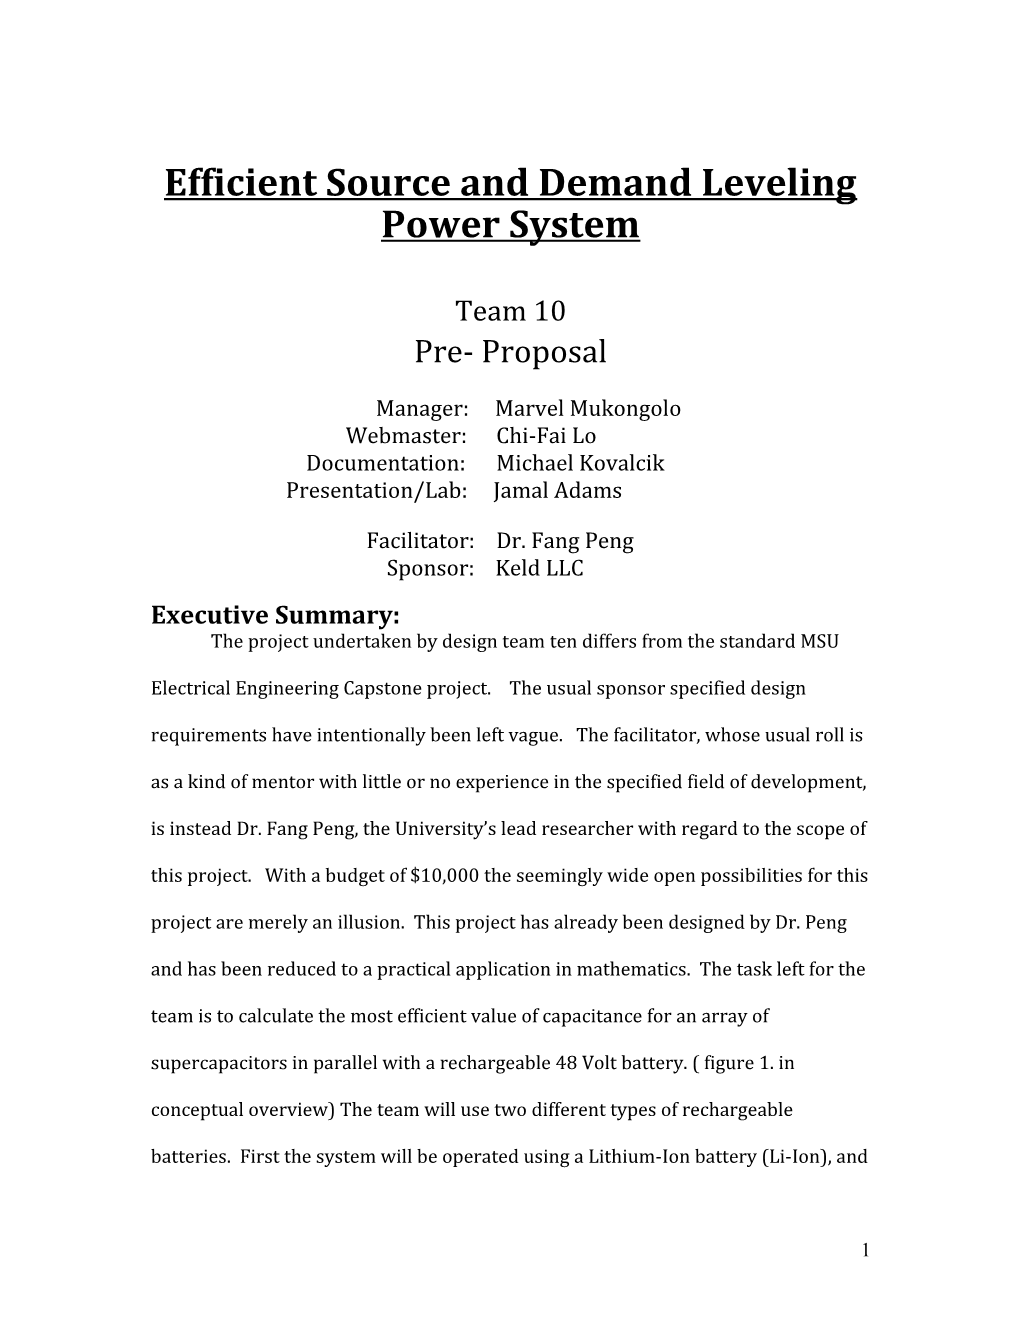 Efficient Source and Demand Leveling Power System